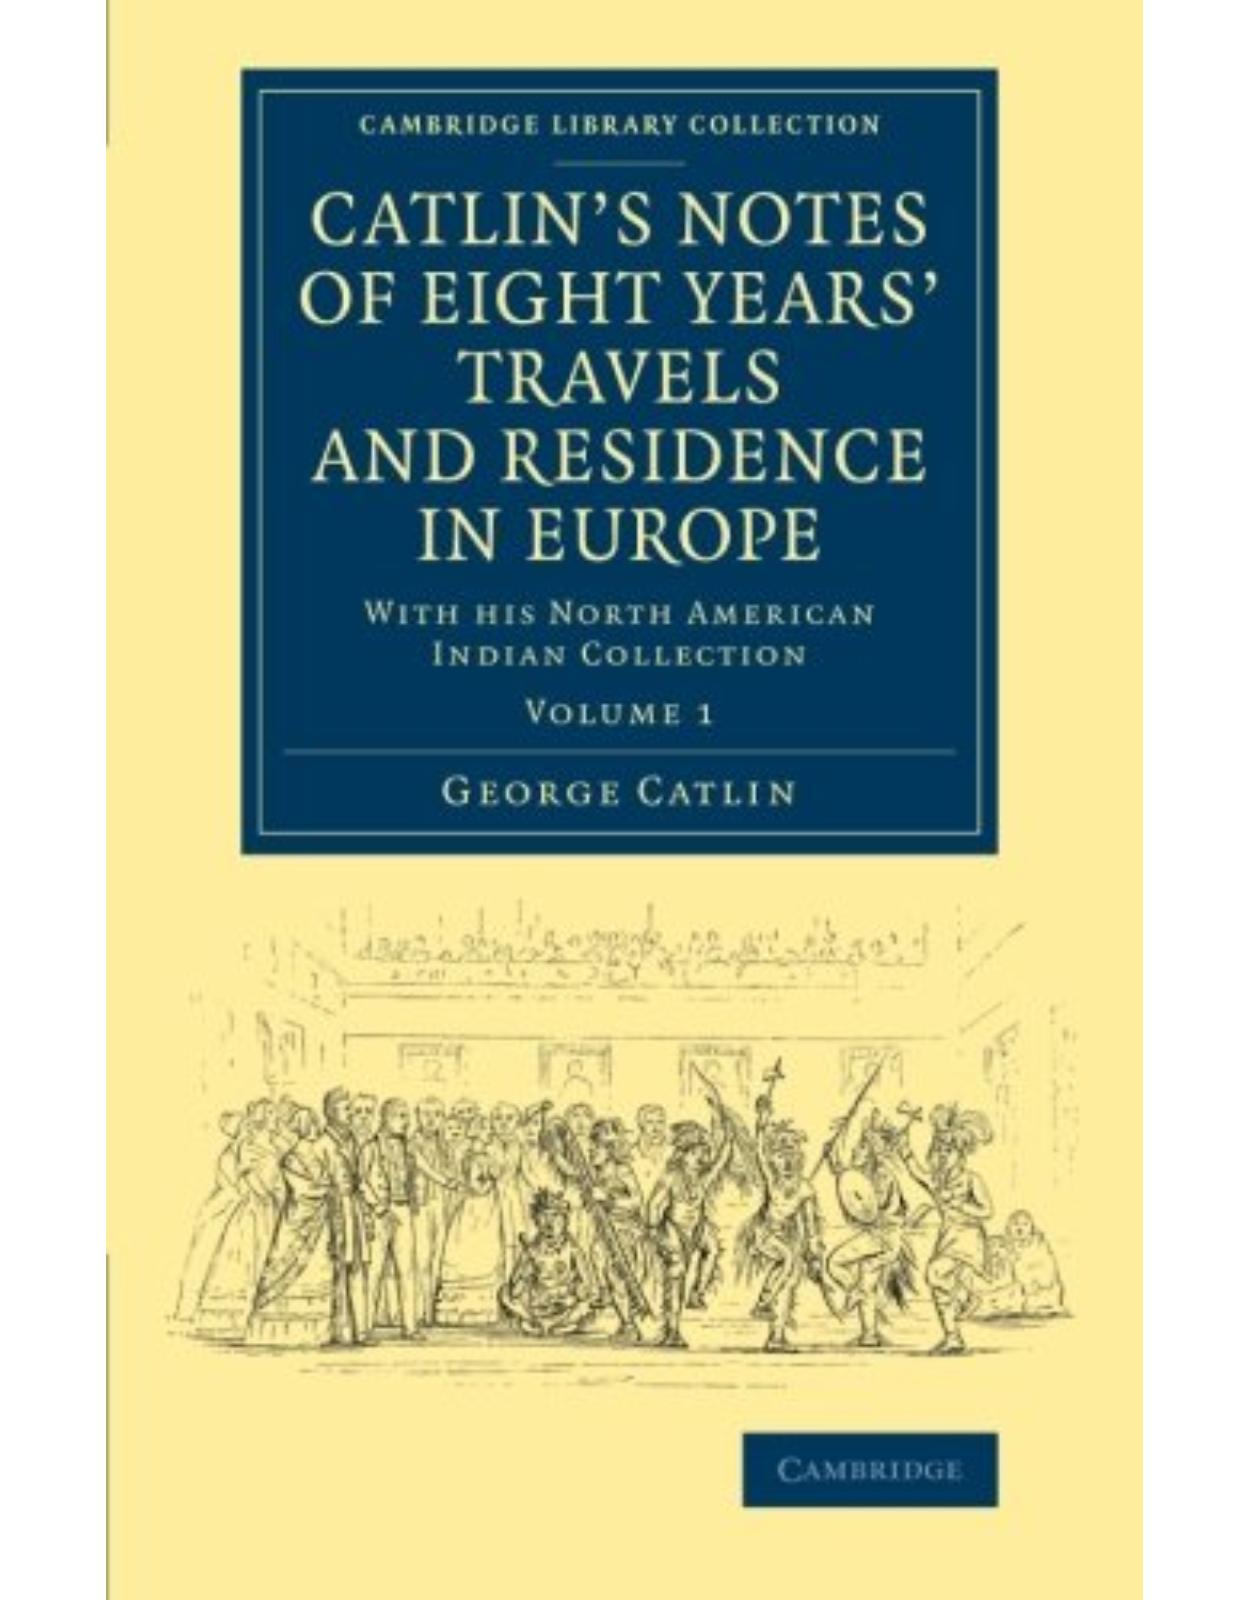 CatlinÂ’s Notes of Eight YearsÂ’ Travels and Residence in Europe: Volume 1: With his North American Indian Collection (Cambridge Library Collection - North American History)